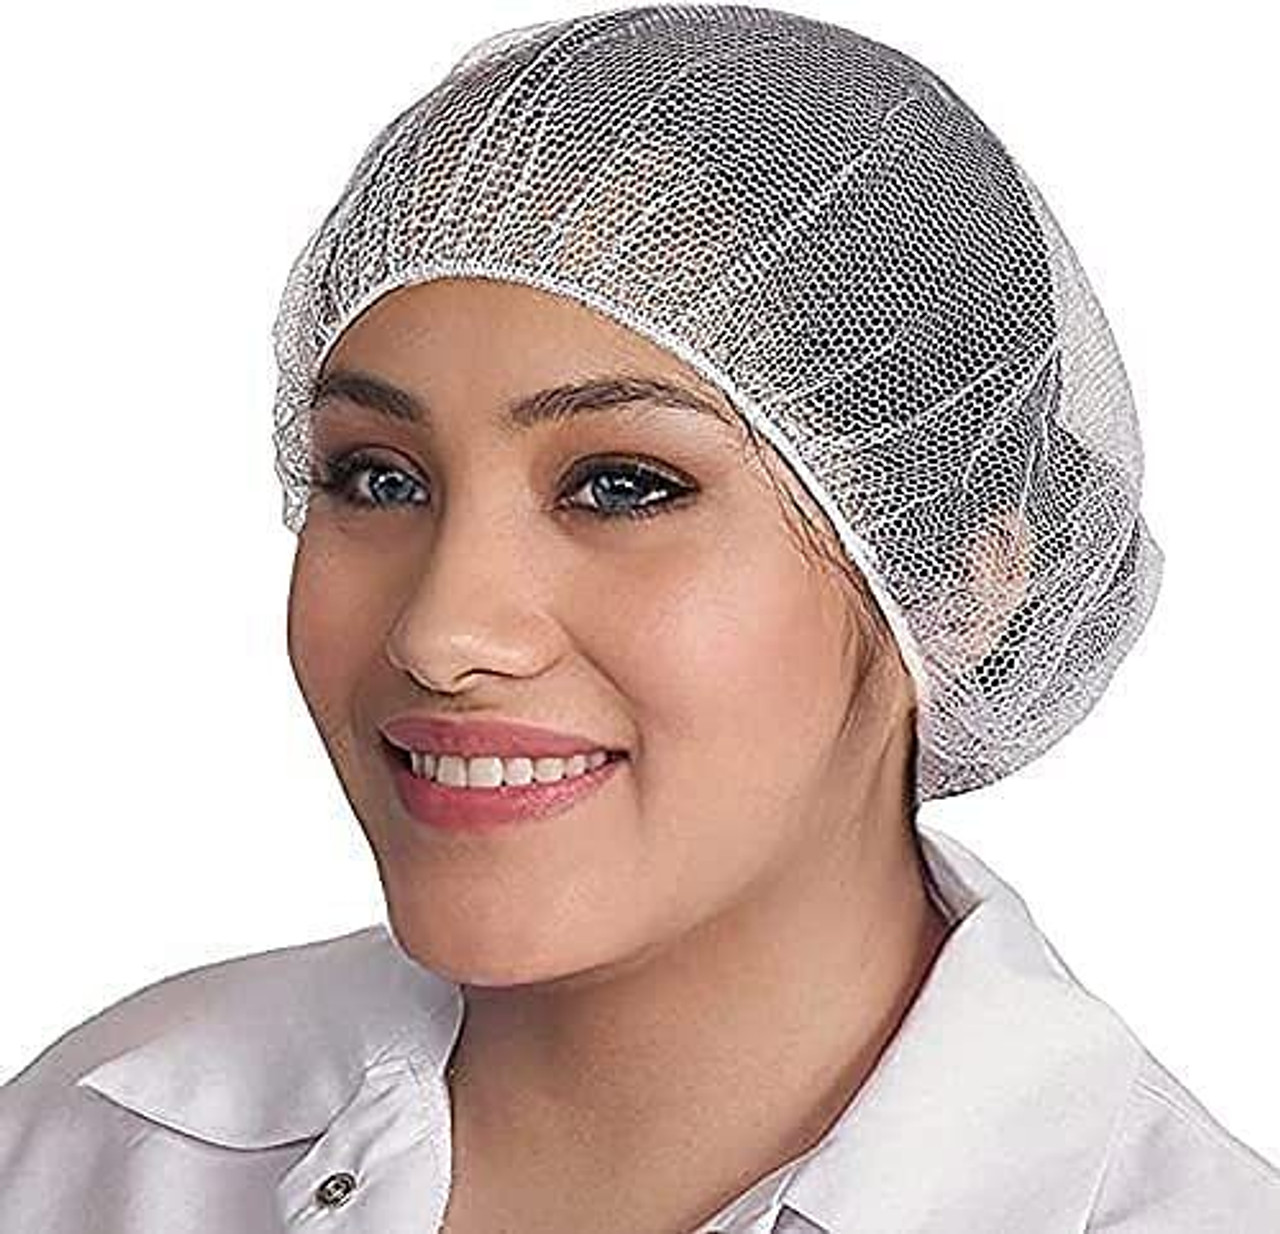 Black Nylon Hair Nets 18". Pack of 100 Disposable Head Caps with Elastic Edge Mesh. Stretchable Adu